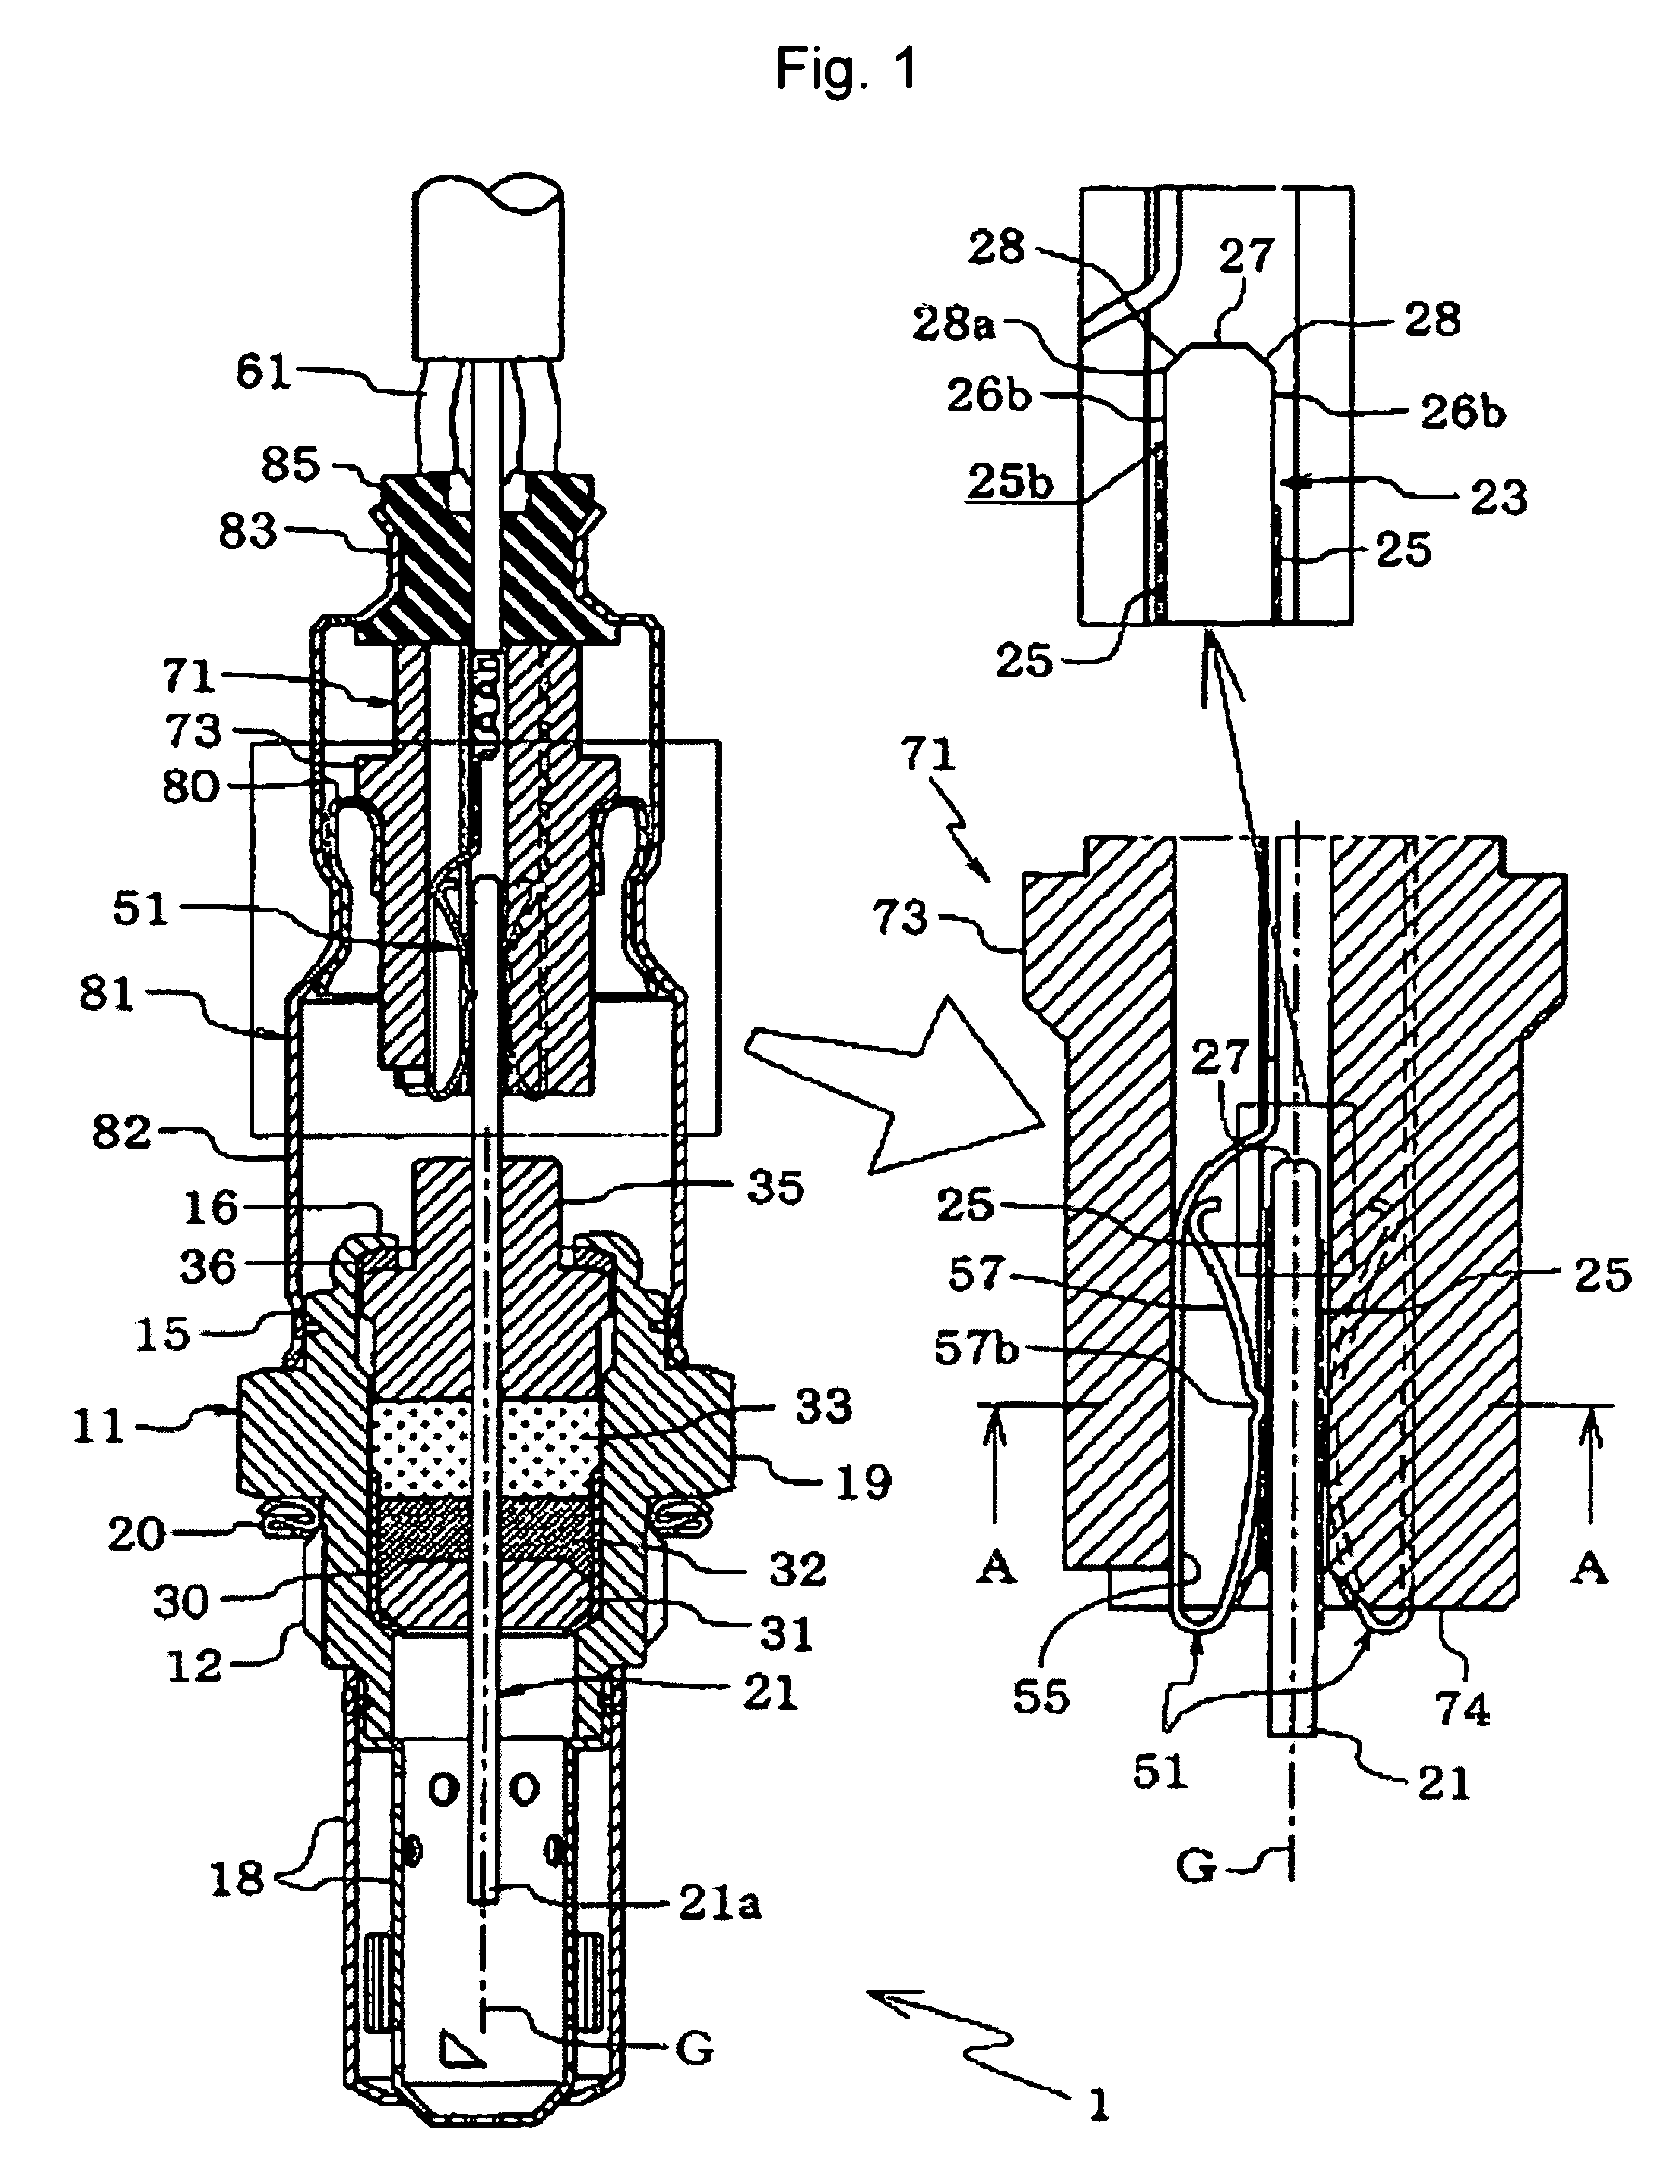 Sensor including a sensor element having electrode terminals spaced apart from a connecting end thereof